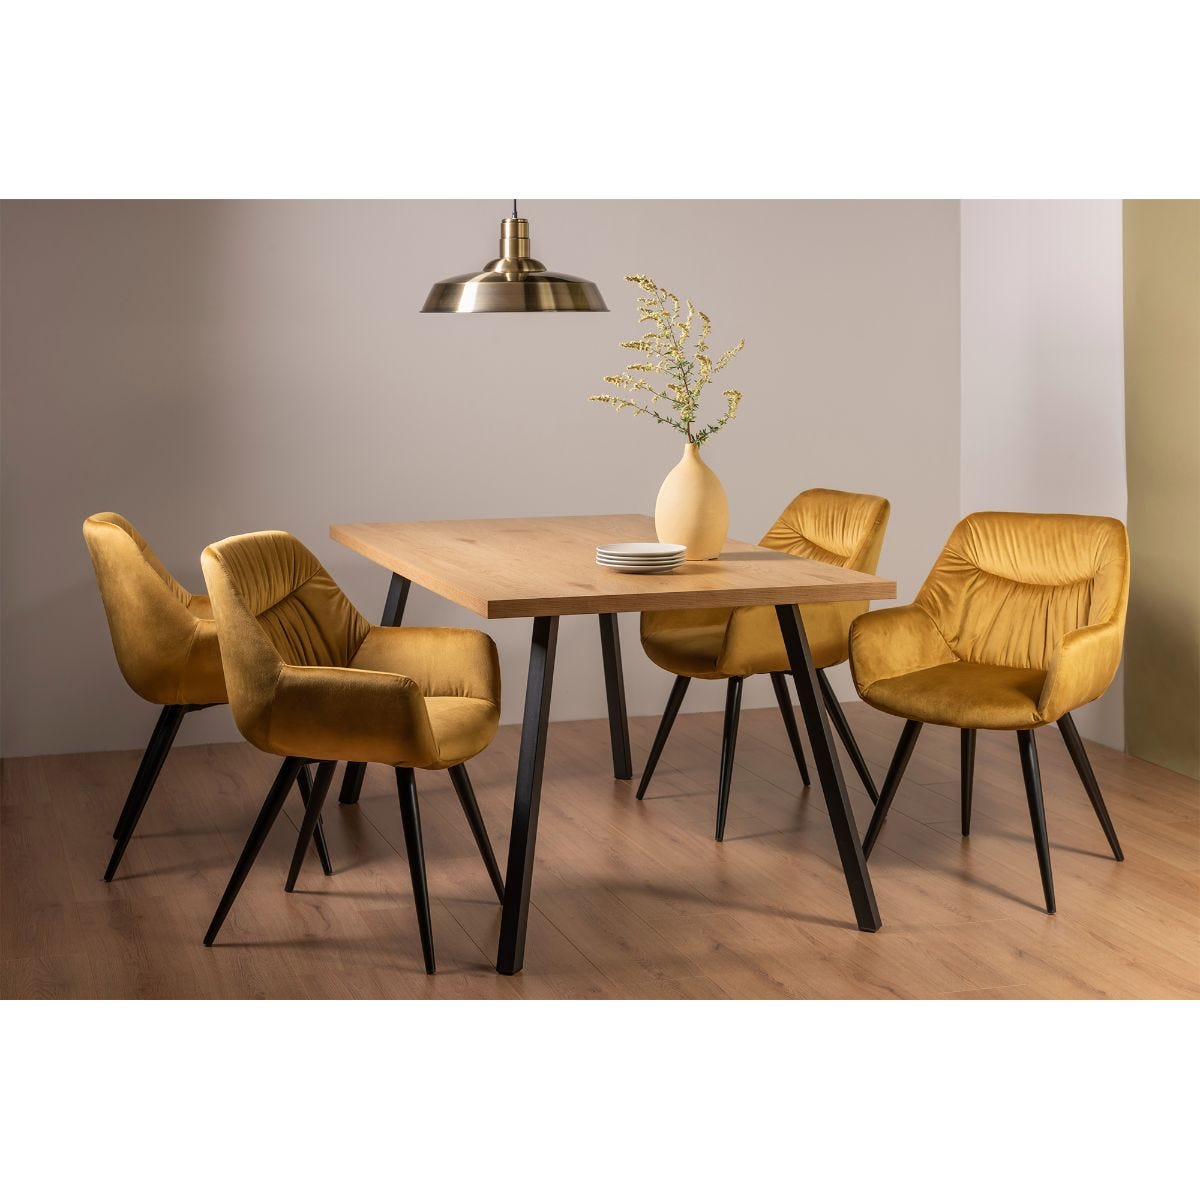 Bentley Designs Rimi Rustic Oak Effect Melamine 6 Seater Dining Table With 4 Legs & 4 Dali Mustard Velvet Fabric Chairs With Black Powder Coated Legs